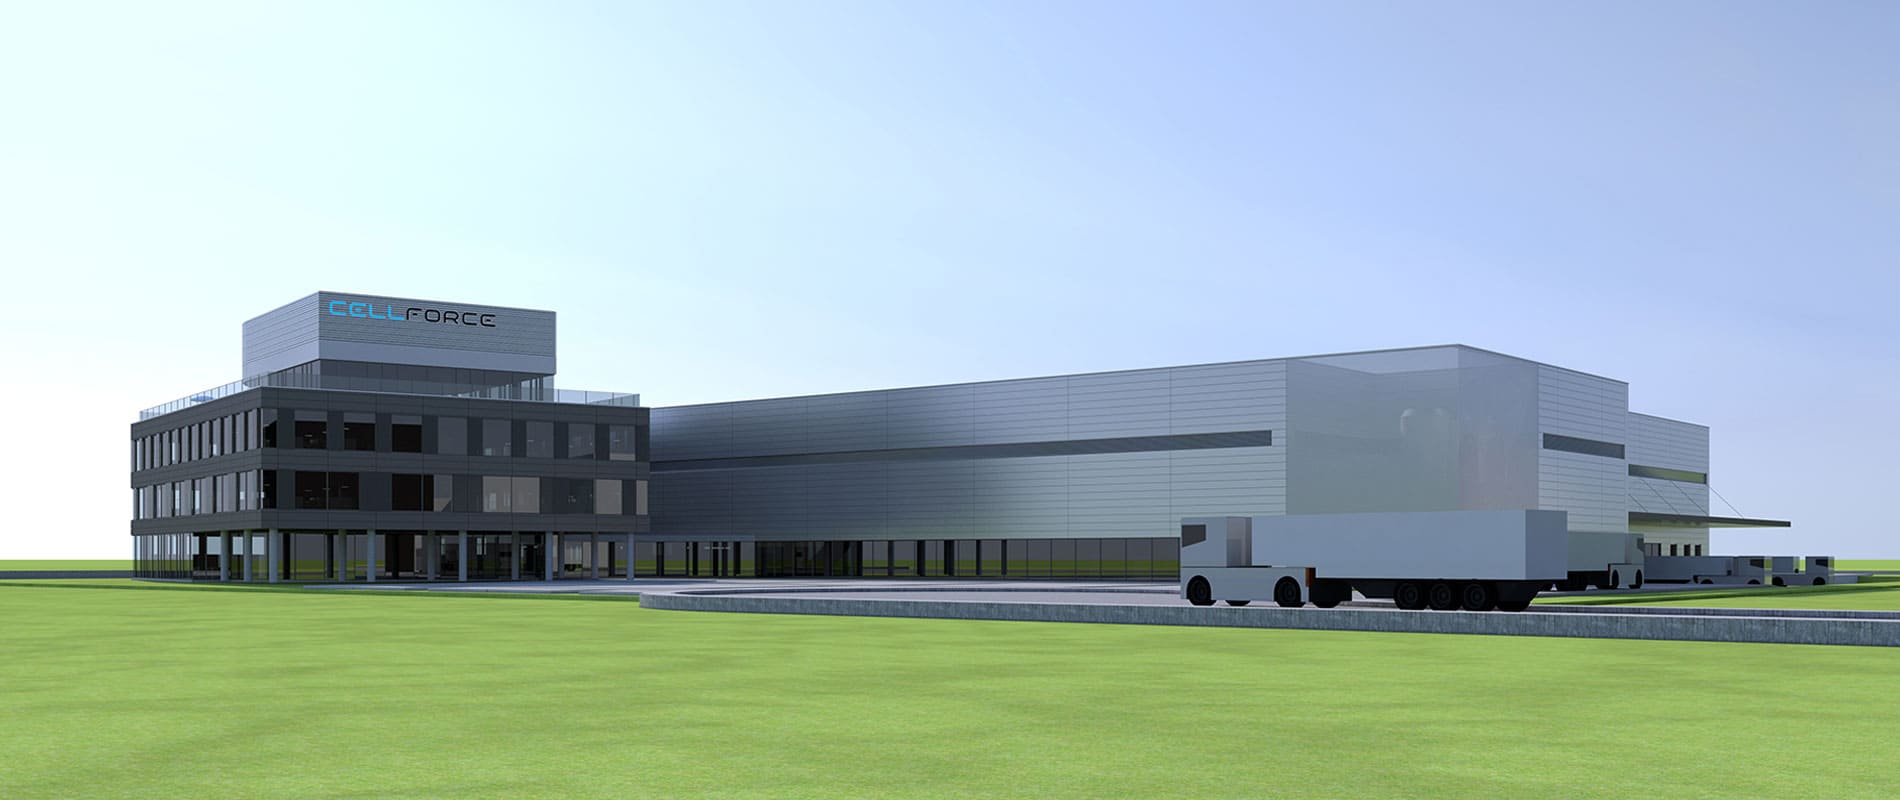 Visualization of the production facility